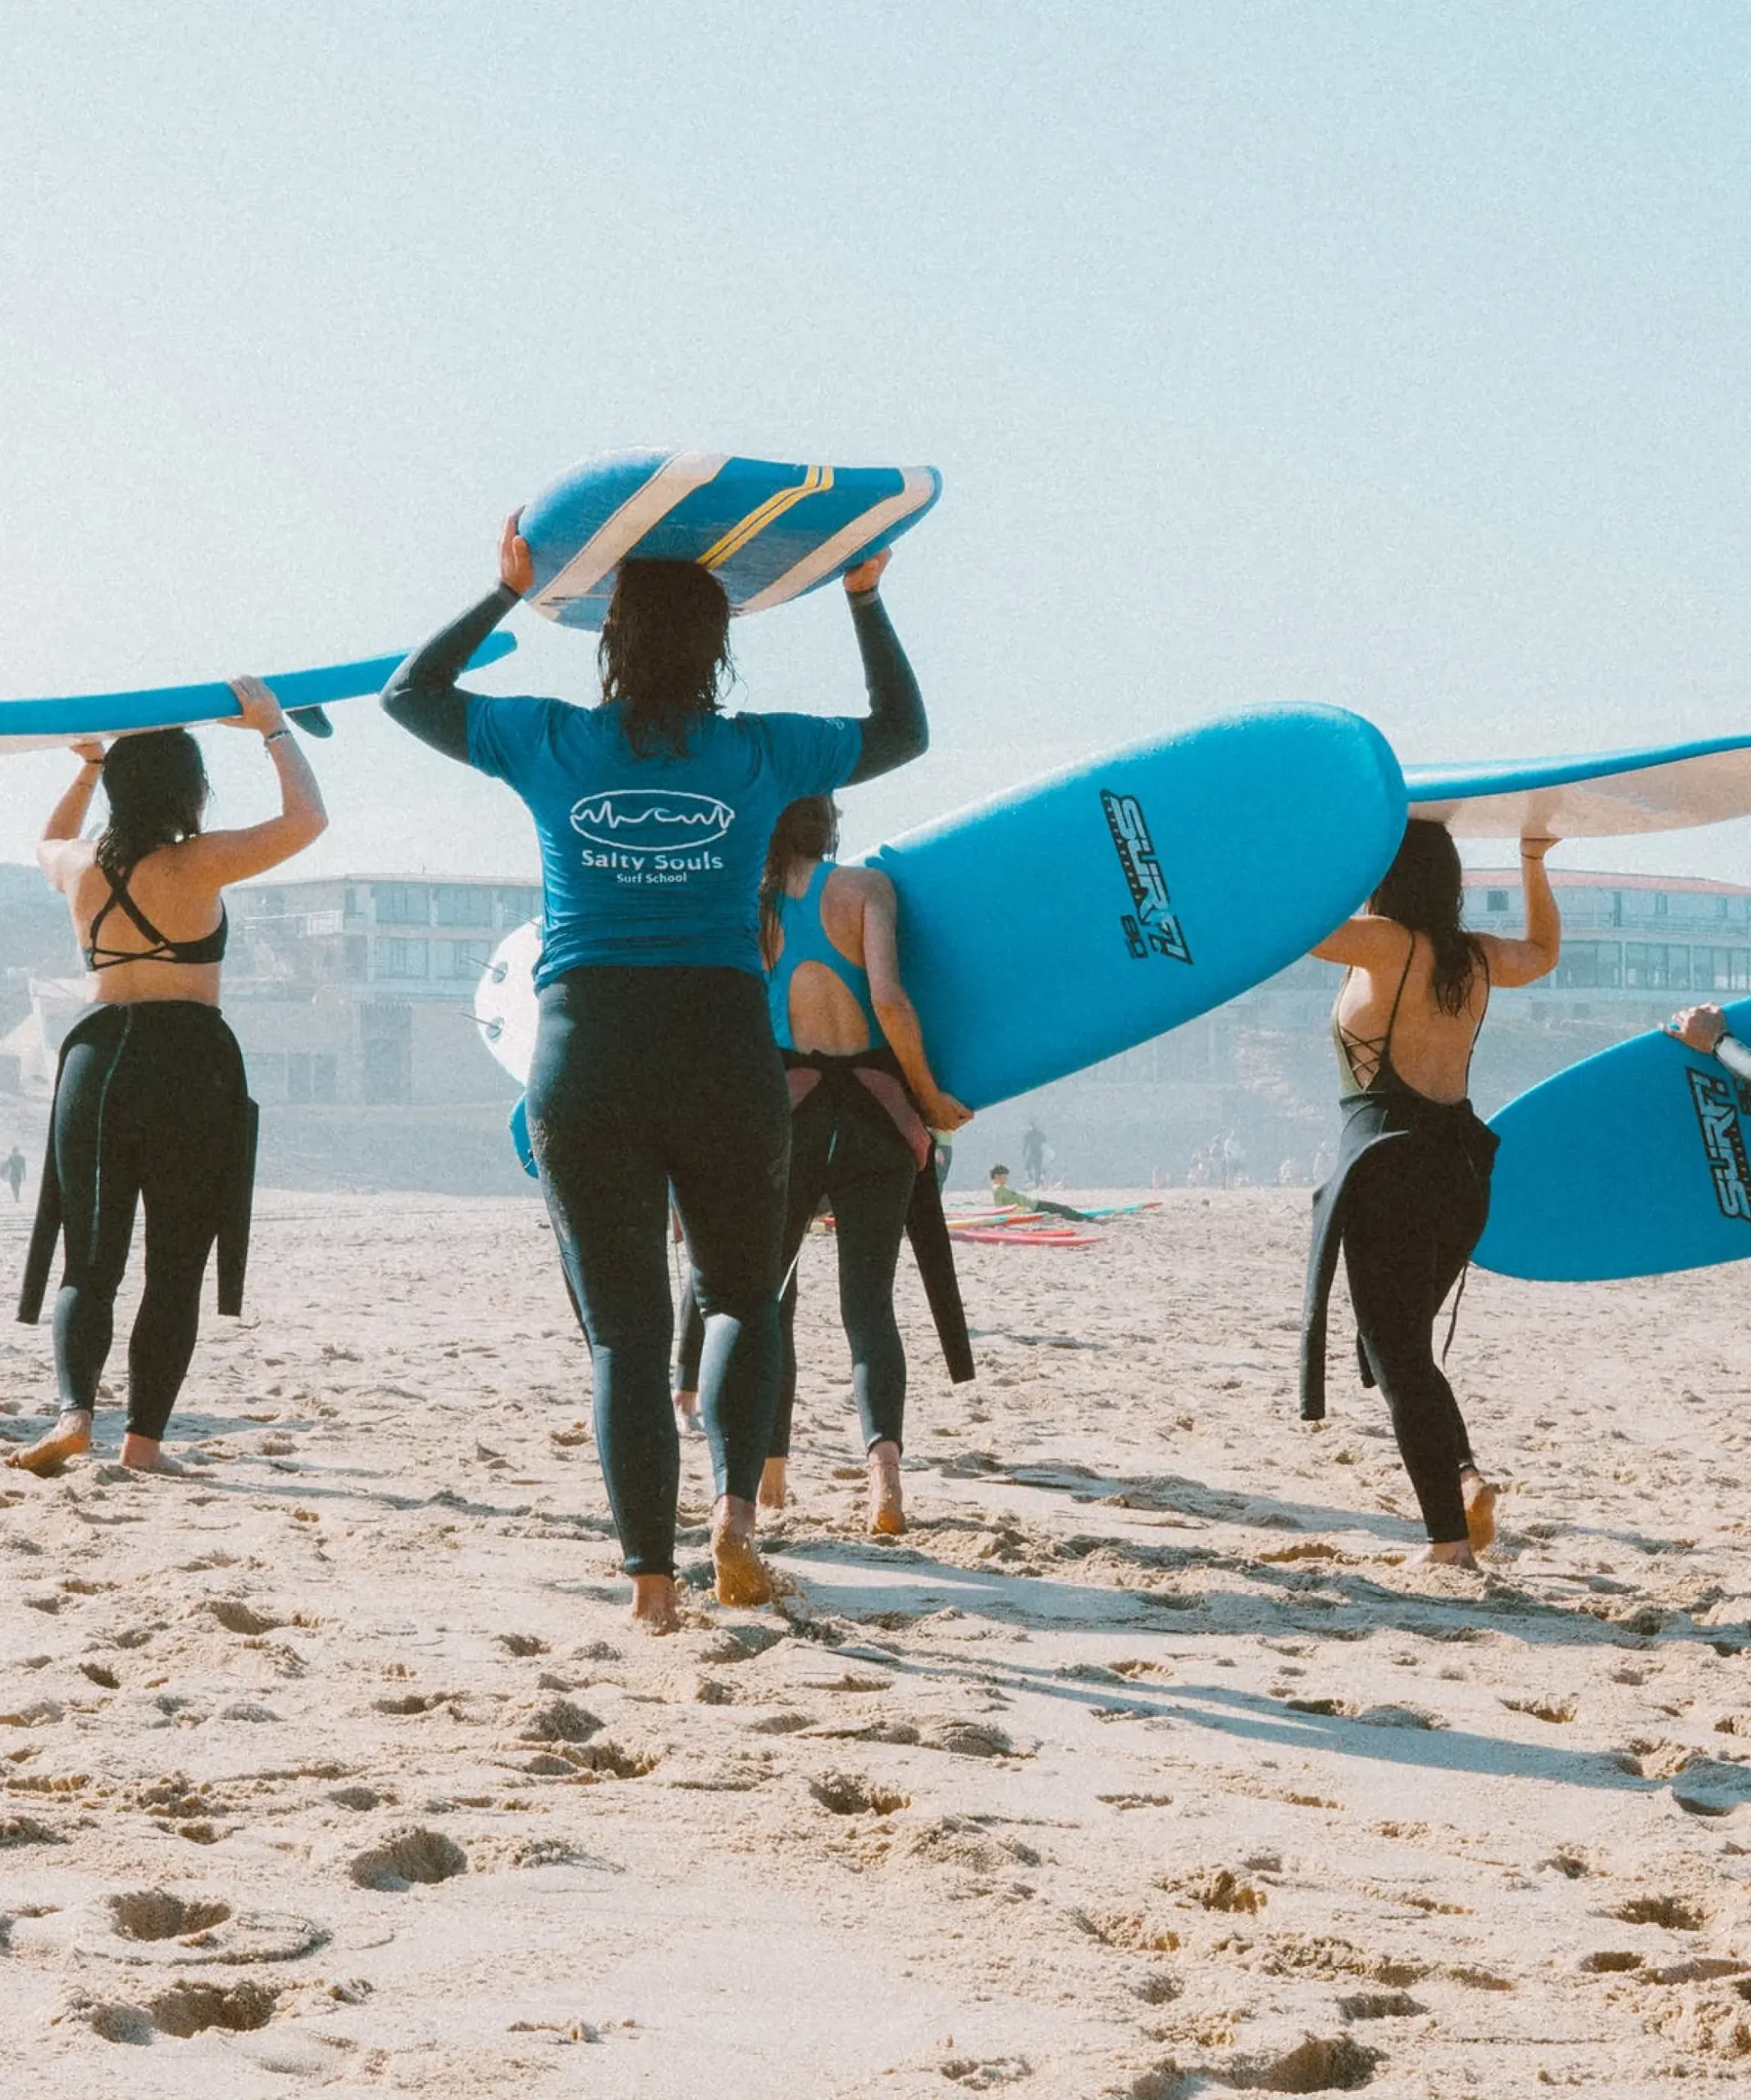 A group of people walking along a sandy beach with surf boards.